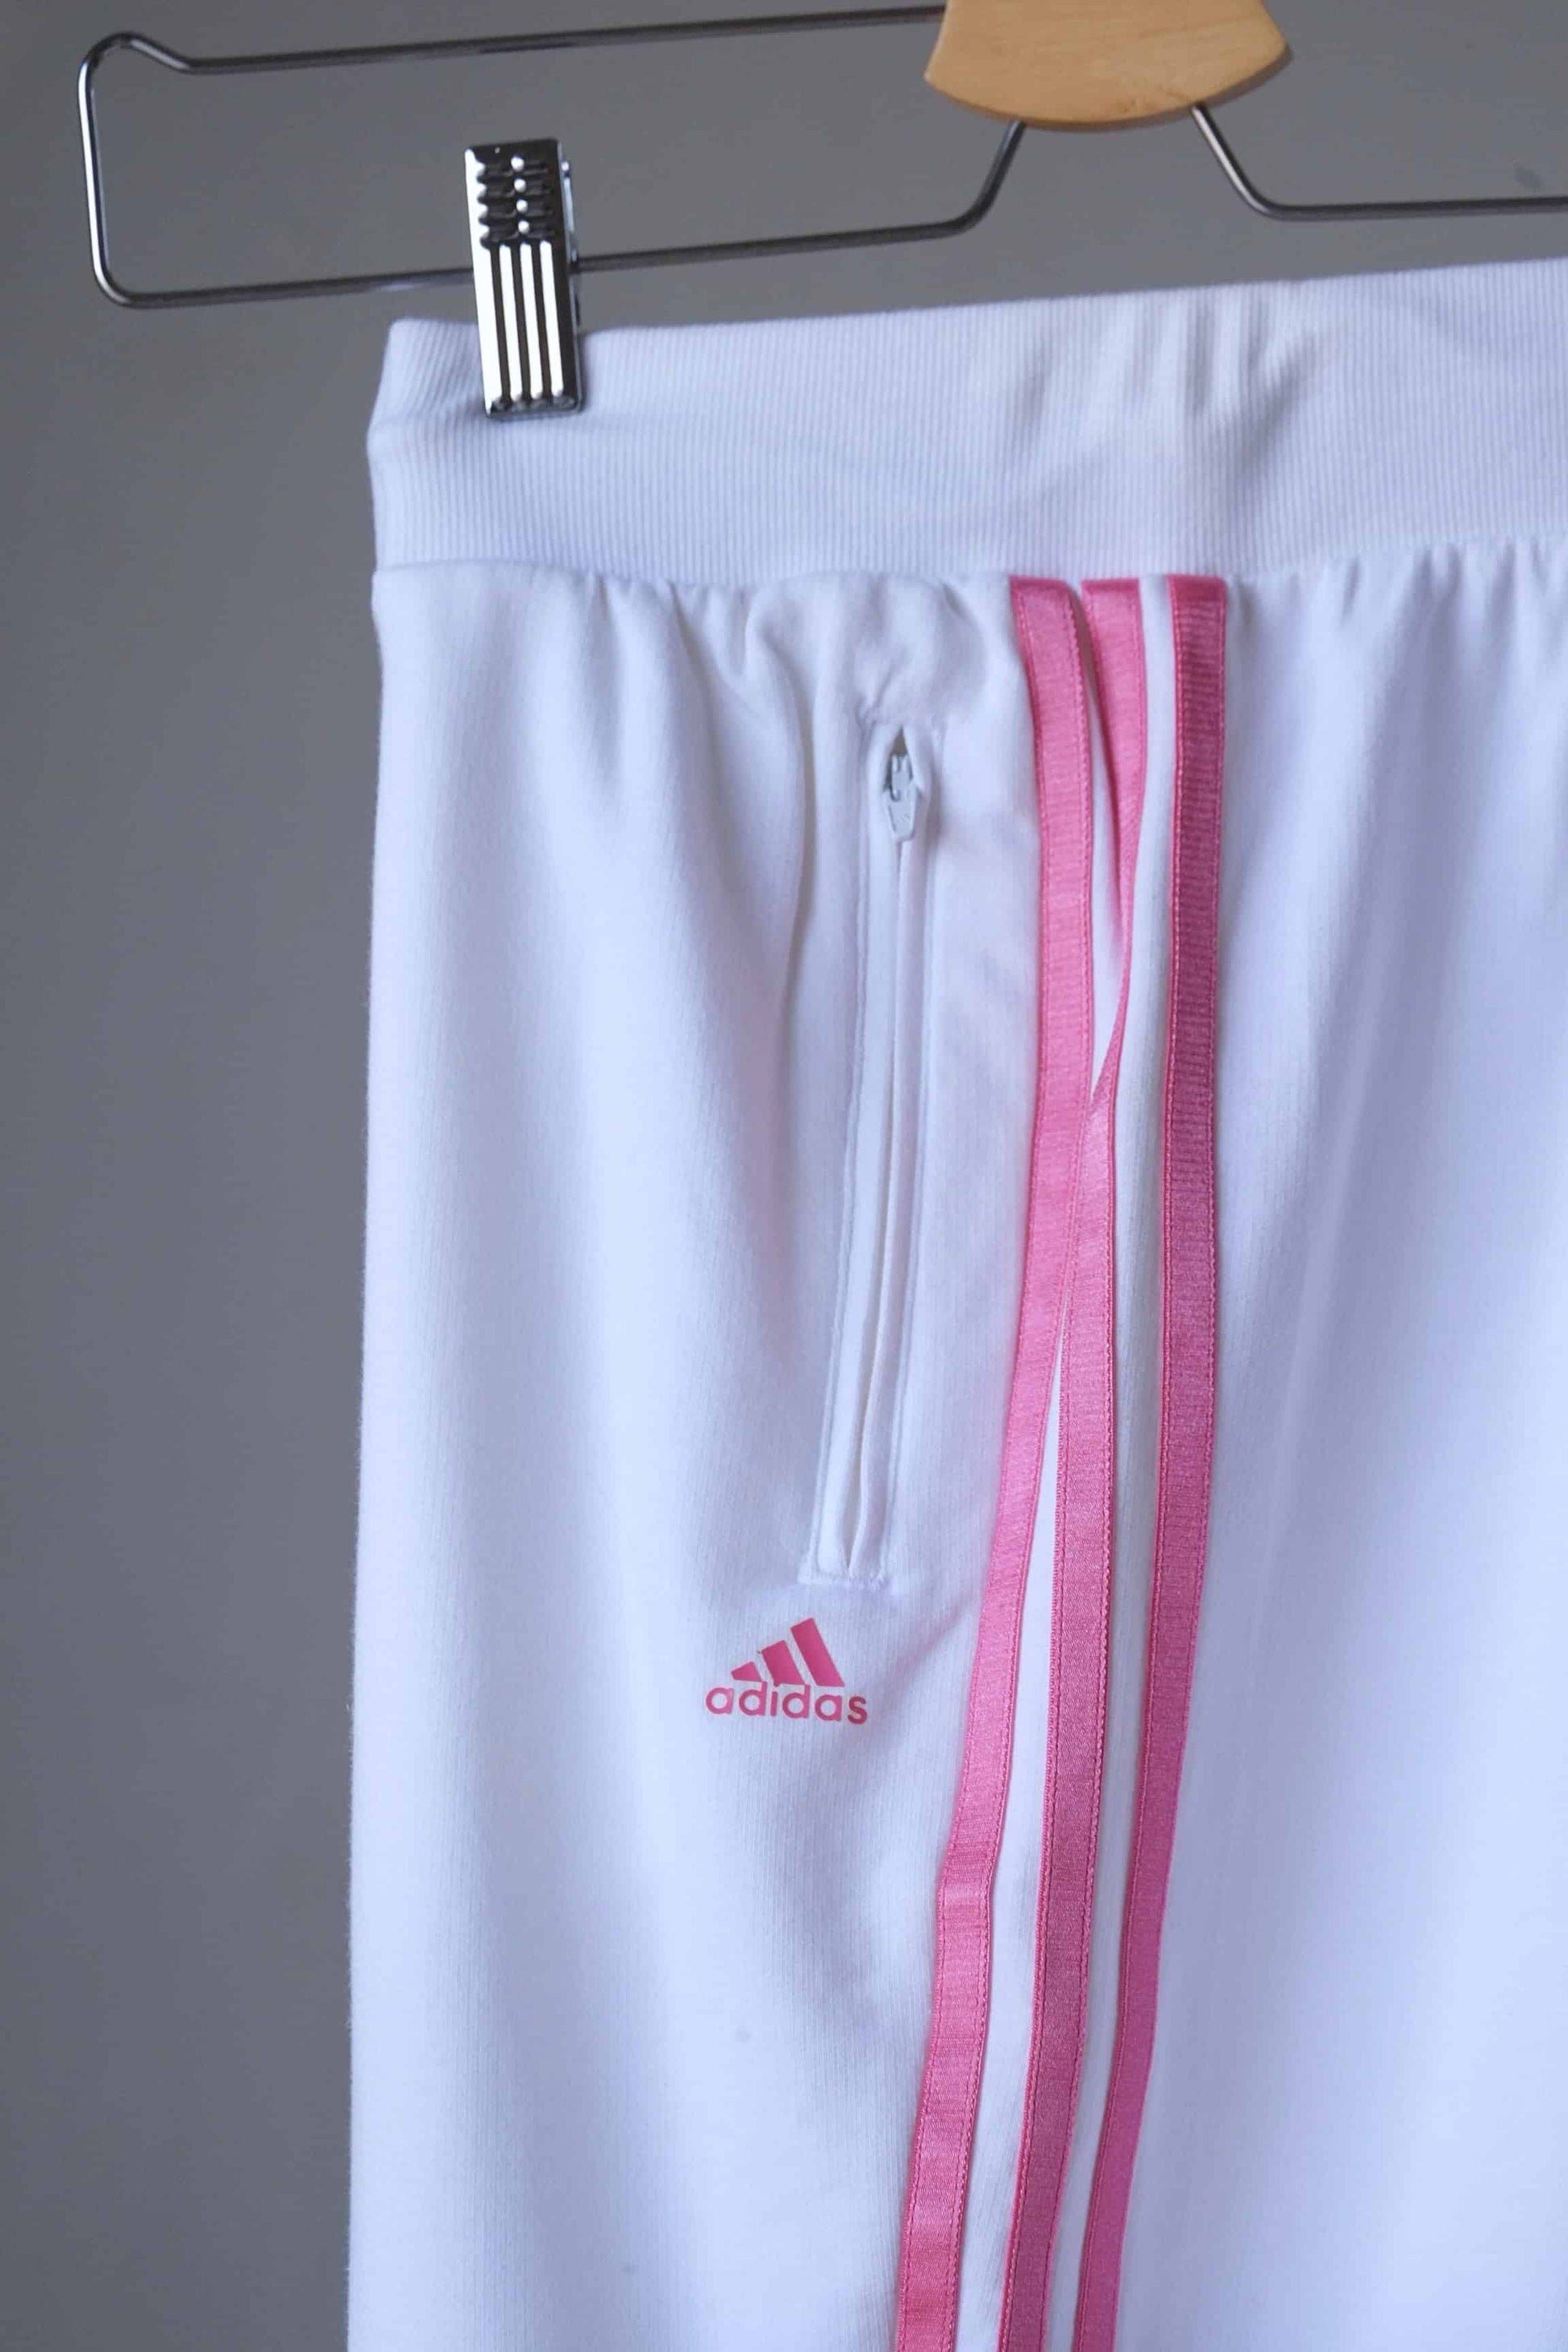 Vintage Adidas Sweatpants white and pink 3 stripes close up